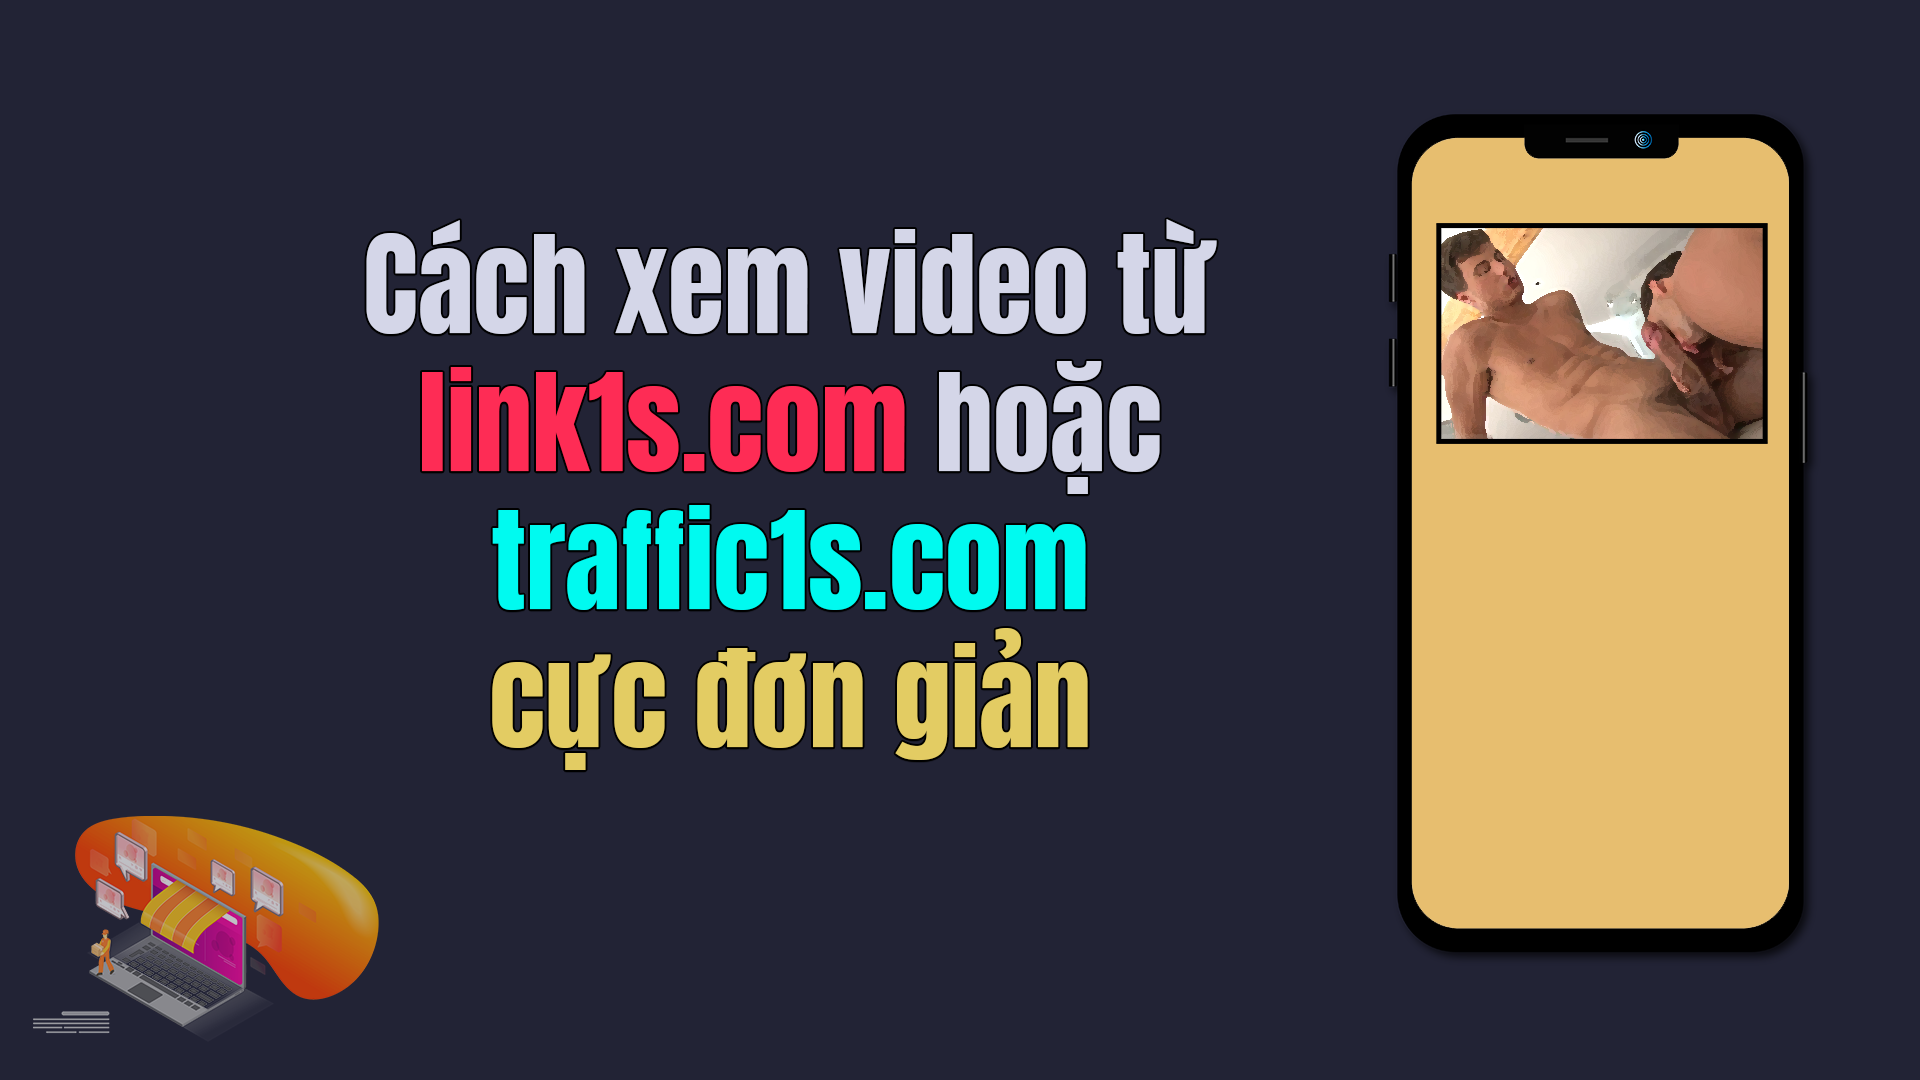 How to watch videos from Link1s.com or Traffic1s.com